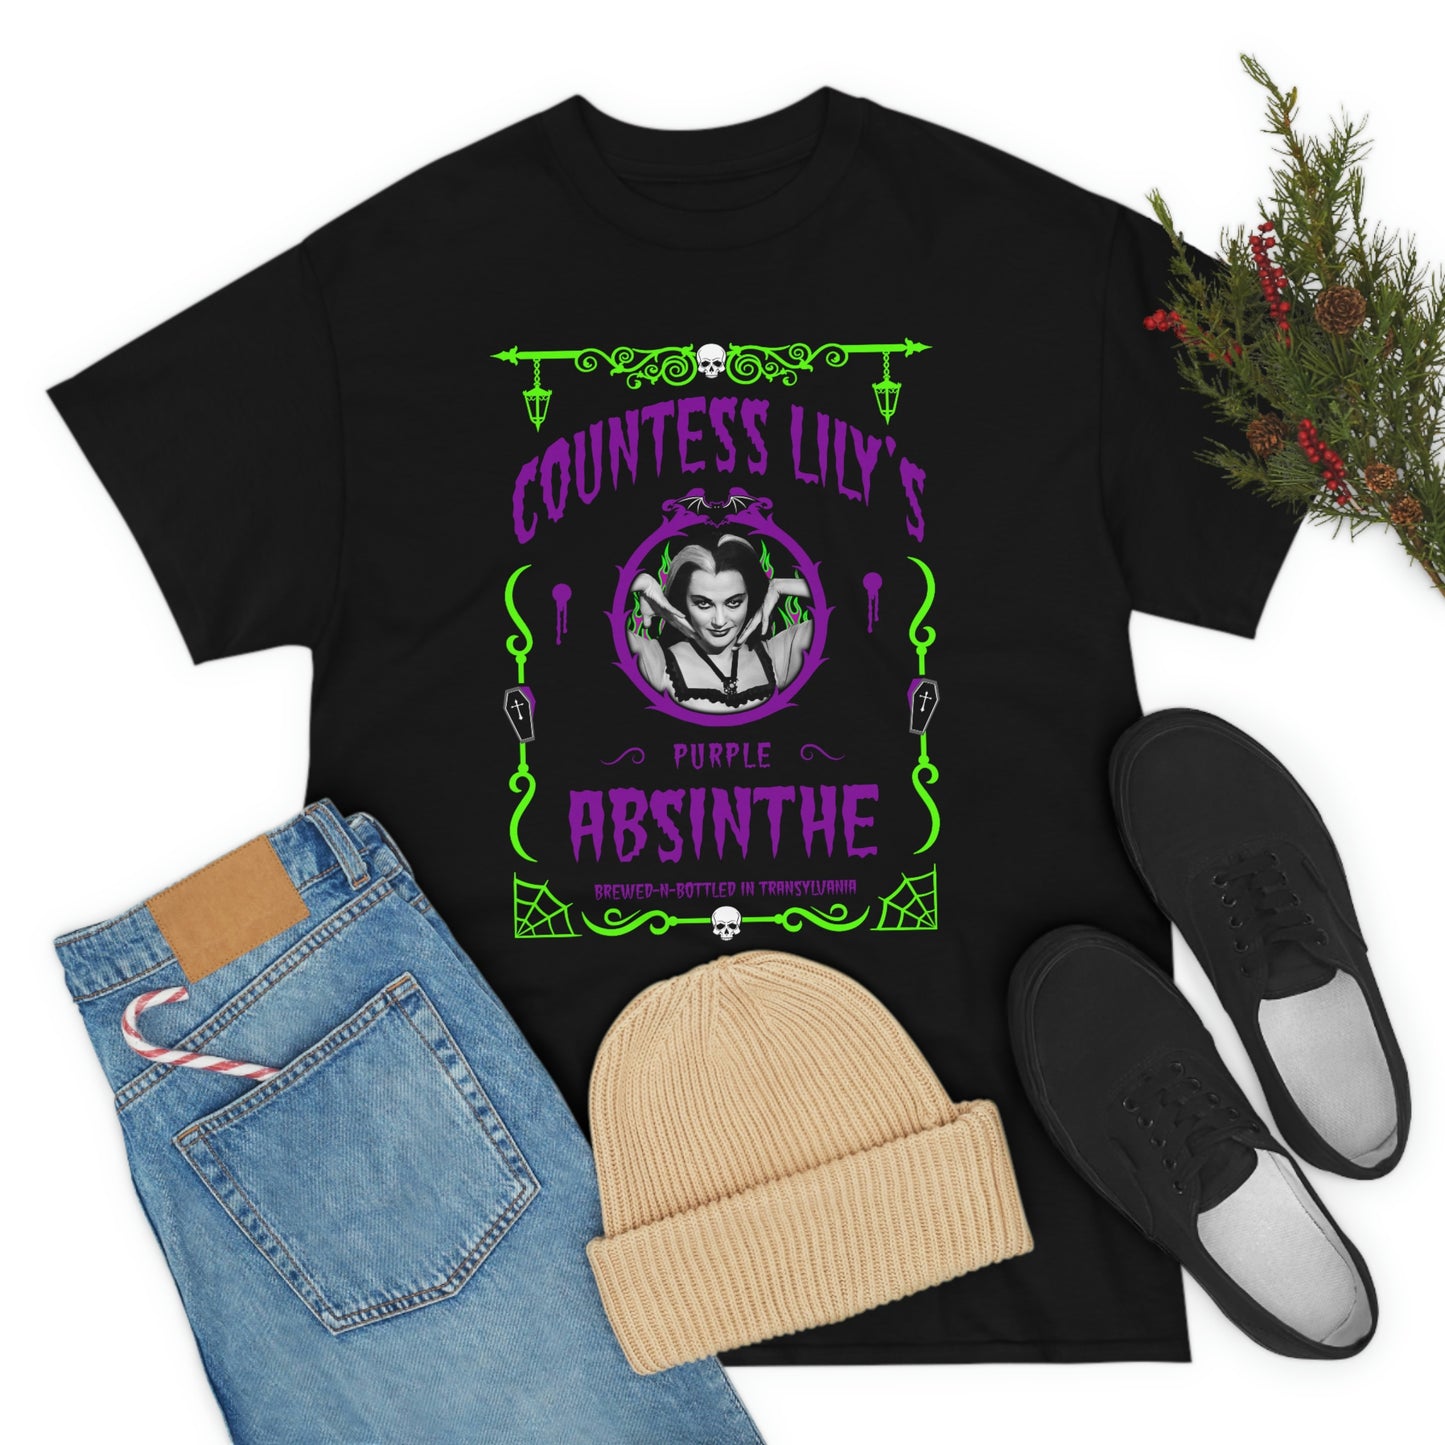 ABSINTHE MONSTERS 3 (COUNTESS LILY) Unisex Heavy Cotton Tee